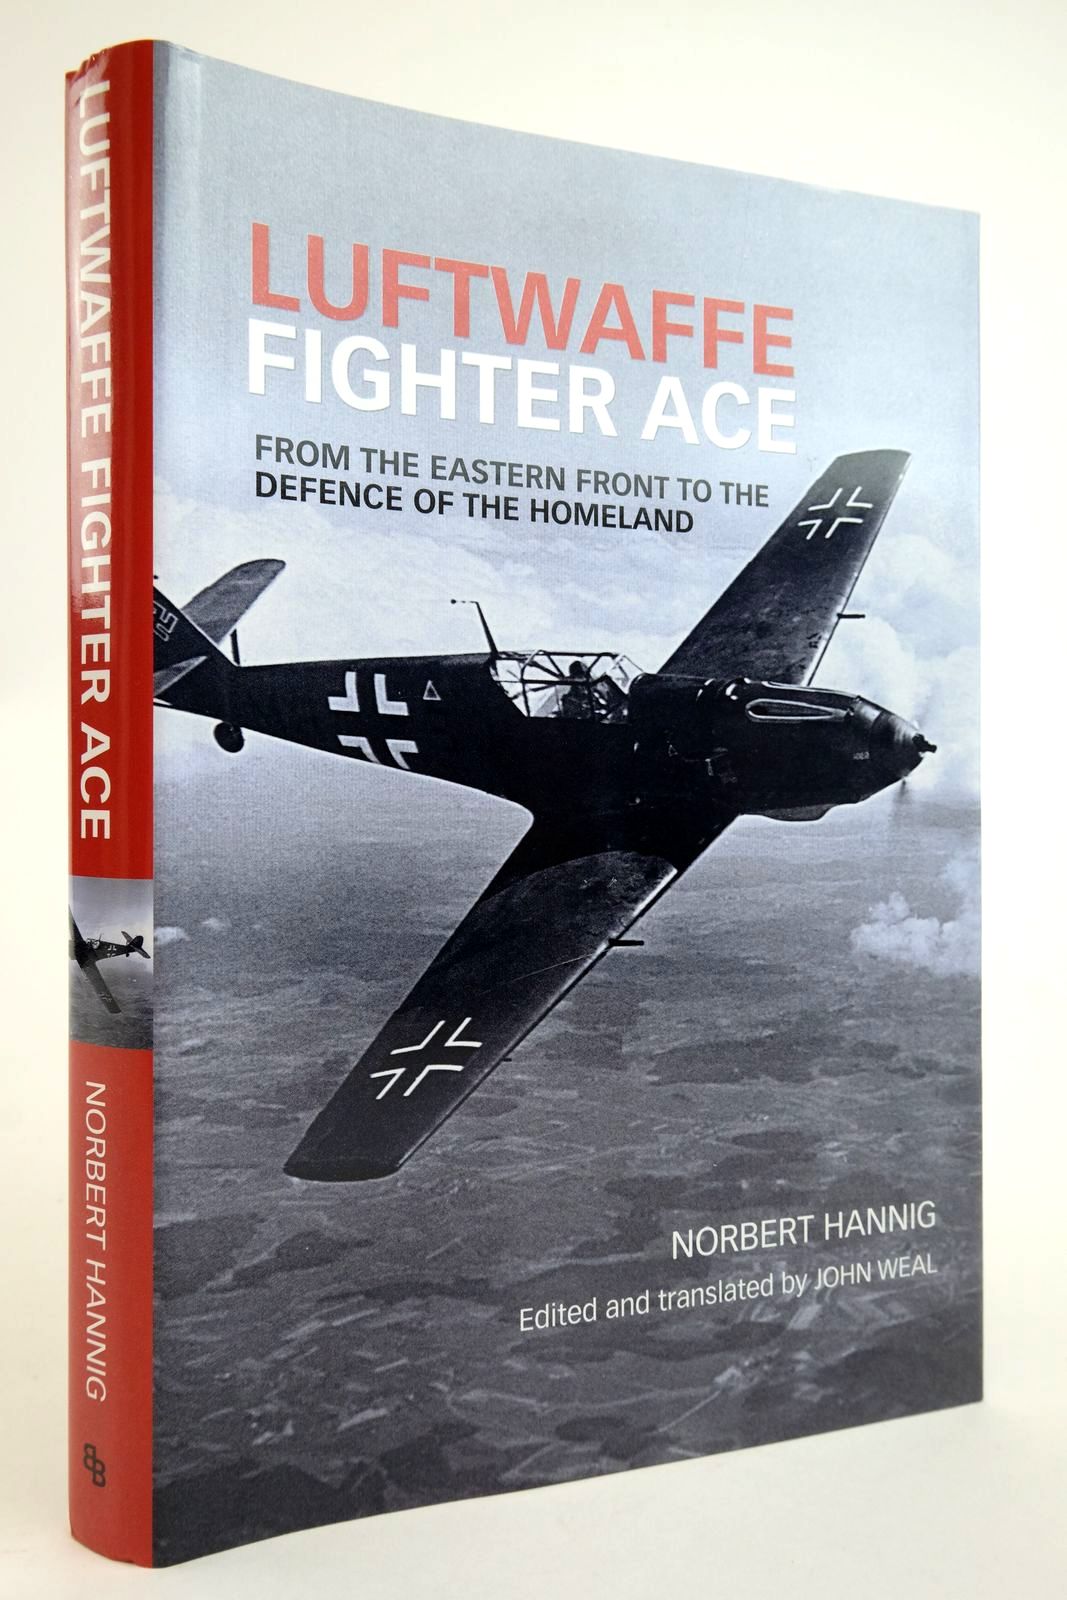 Photo of LUFTWAFFE FIGHTER ACE FROM THE EASTERN FRONT TO THE DEFENCE OF THE HOMELAND written by Hannig, Norbert published by Bounty Books (STOCK CODE: 2135812)  for sale by Stella & Rose's Books